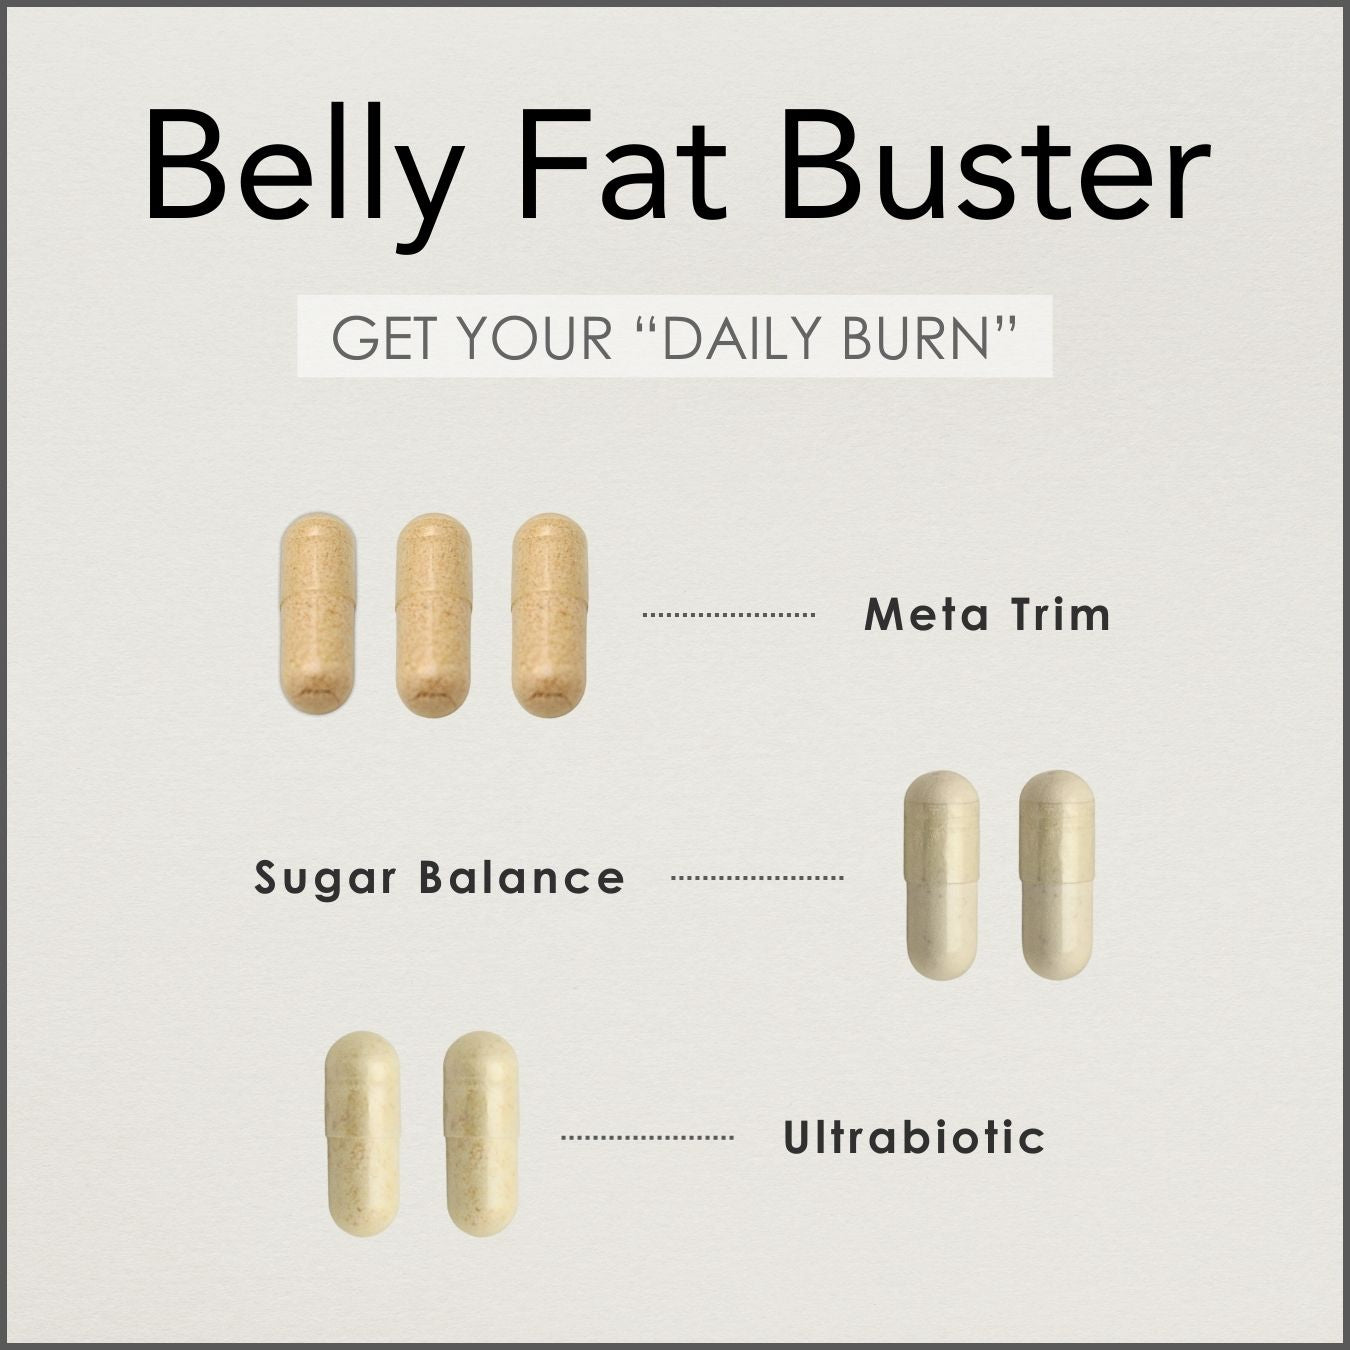 Belly Fat Buster